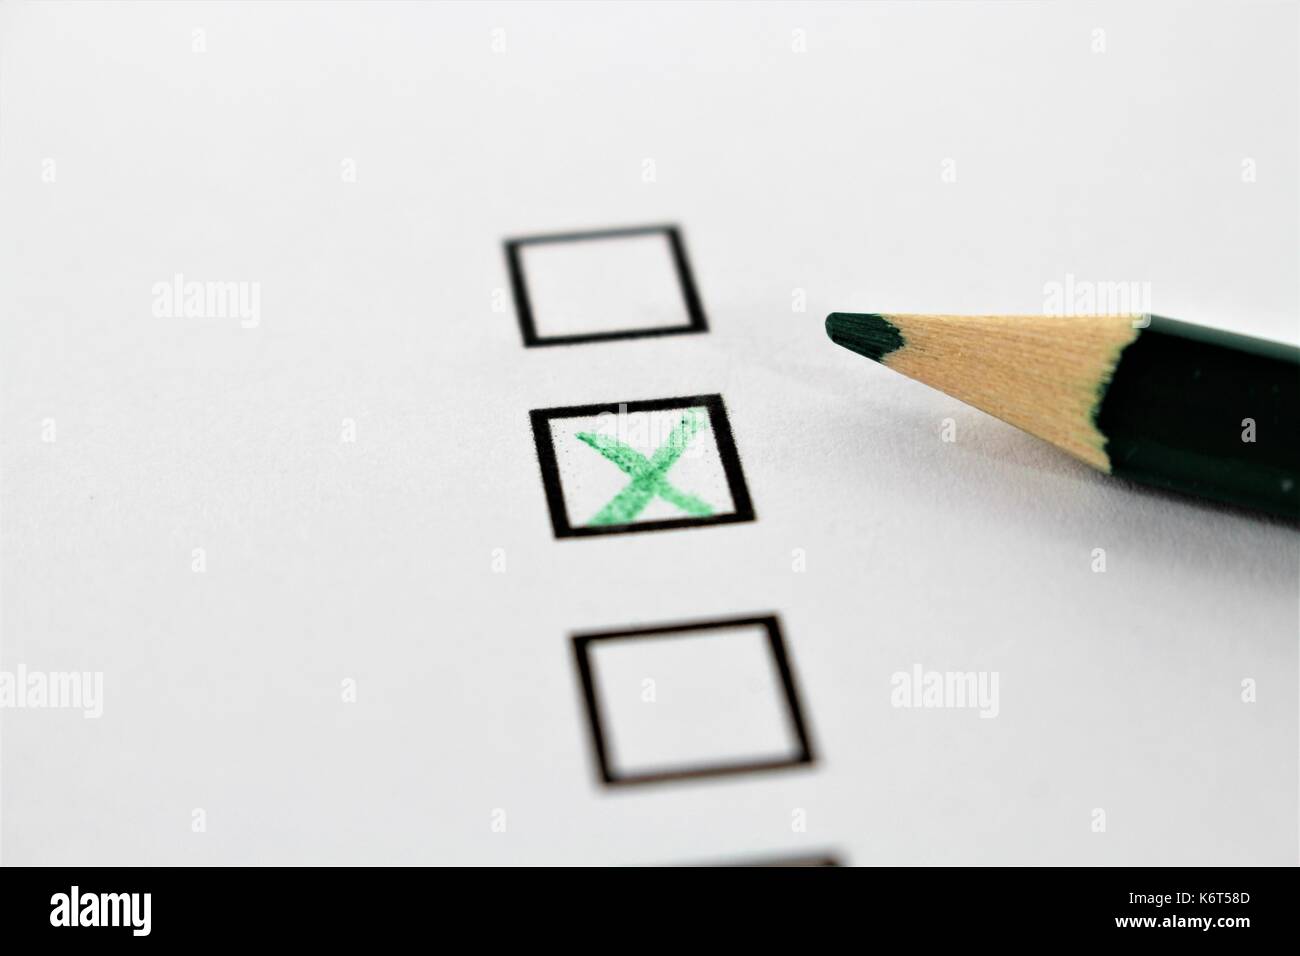 An concept Image of a green pencil and a questionnaire Stock Photo